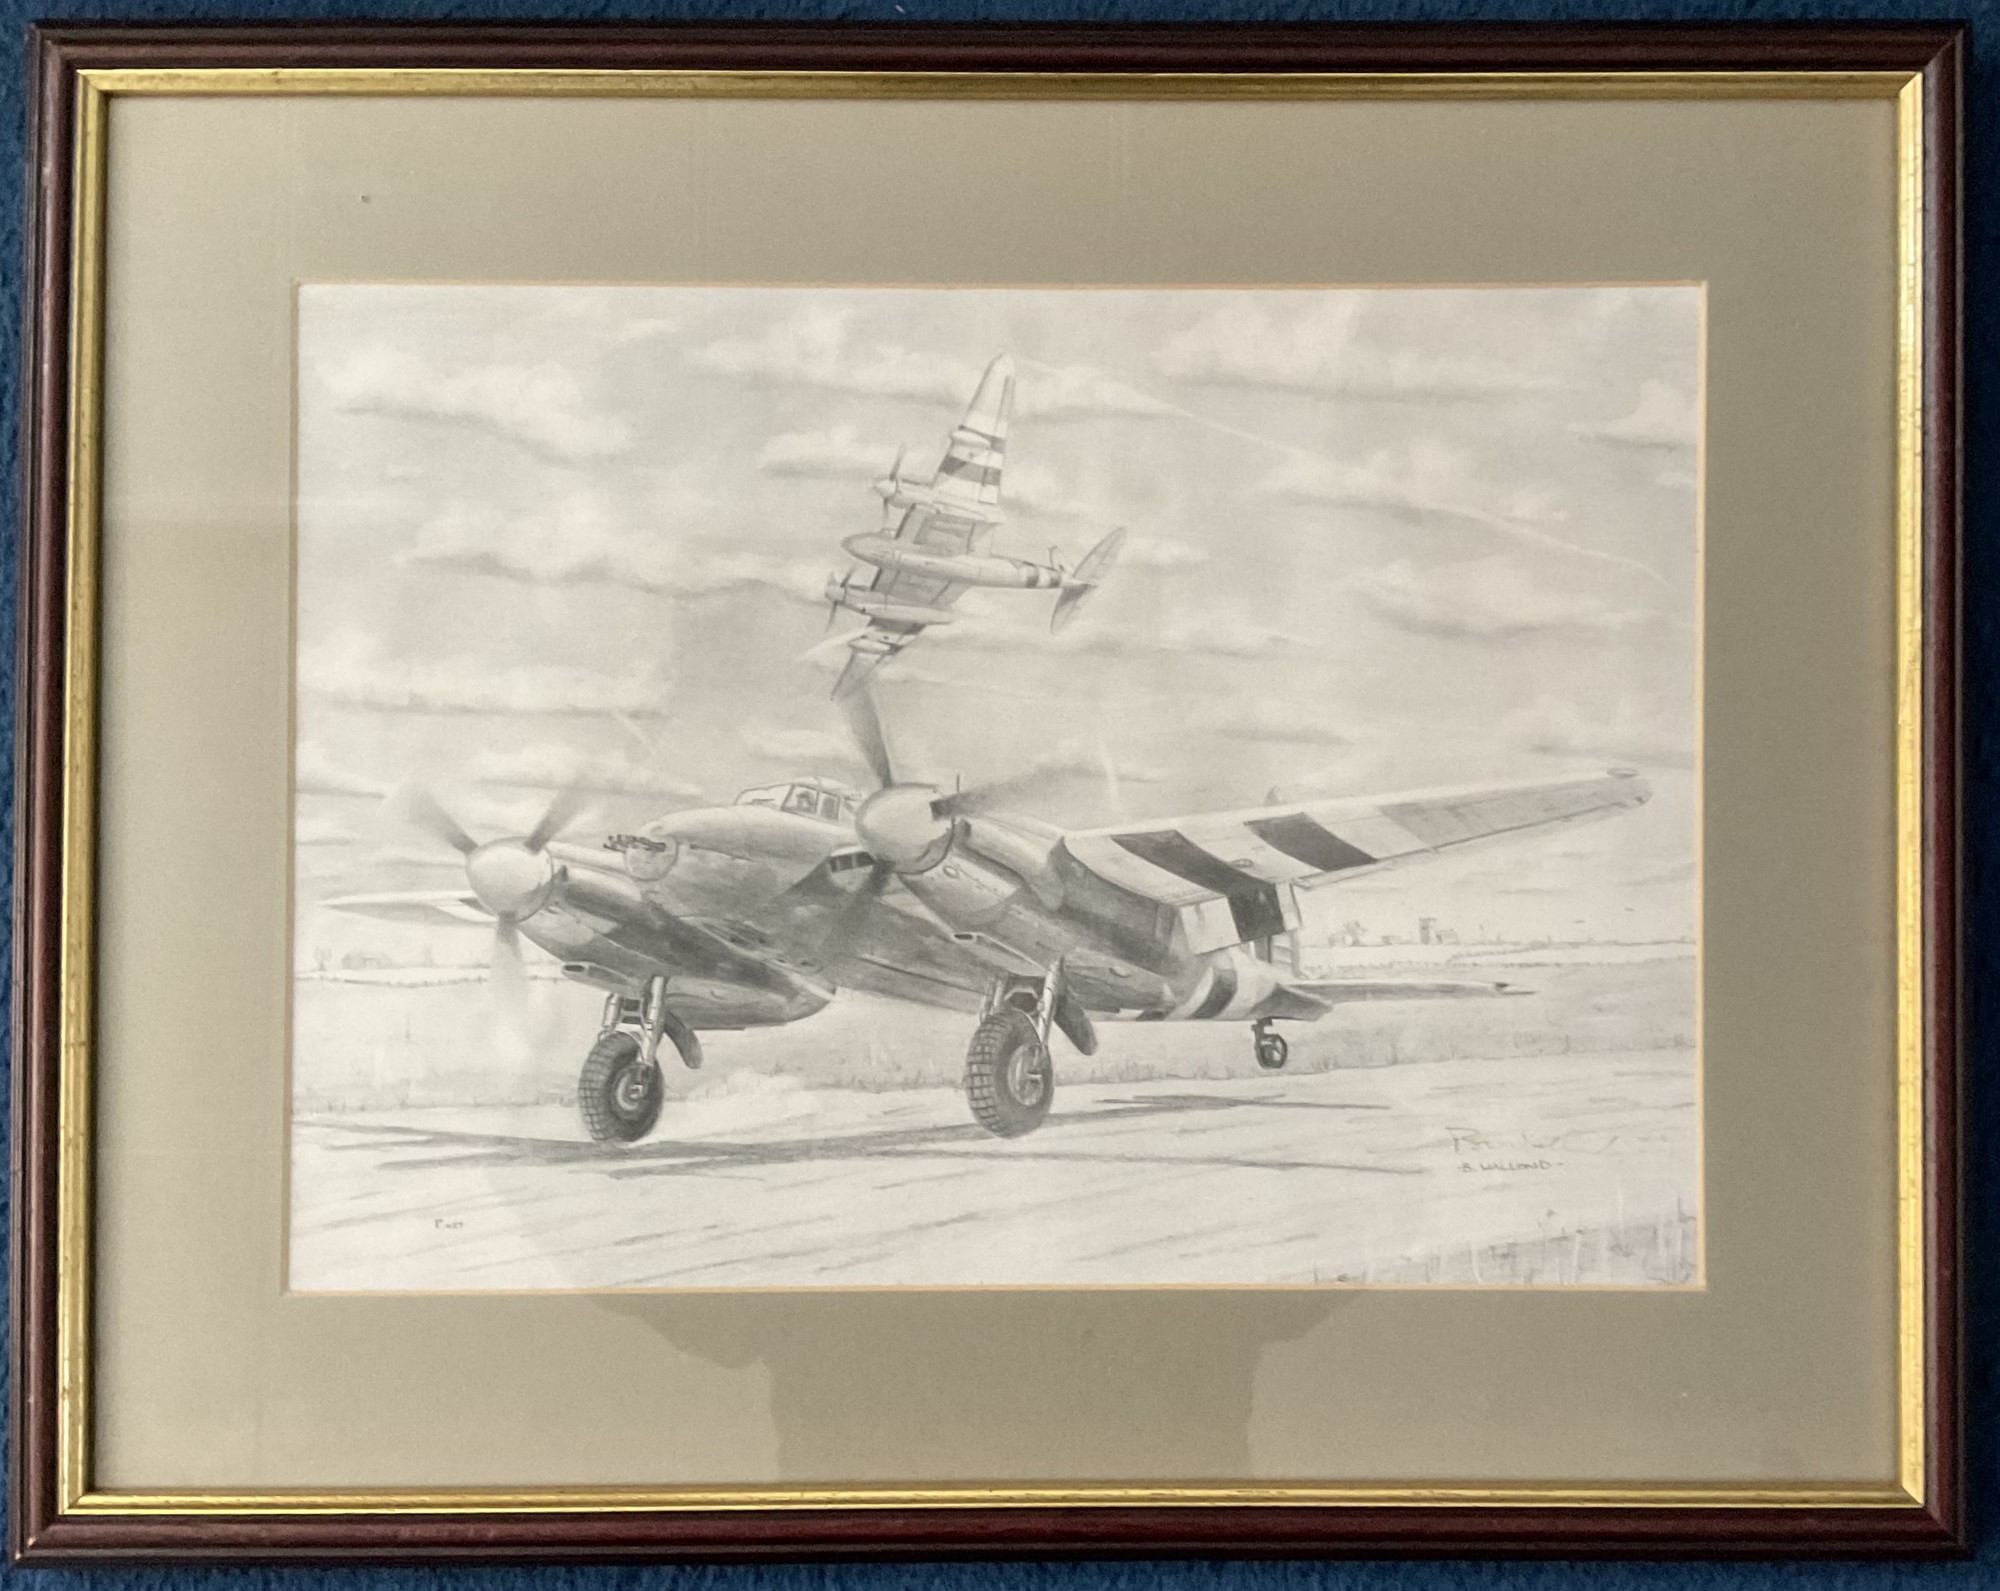 WW2 Collection of 2 Black and White Pencil Drawn Prints Signed by the Artist B Wallond Showing RAF